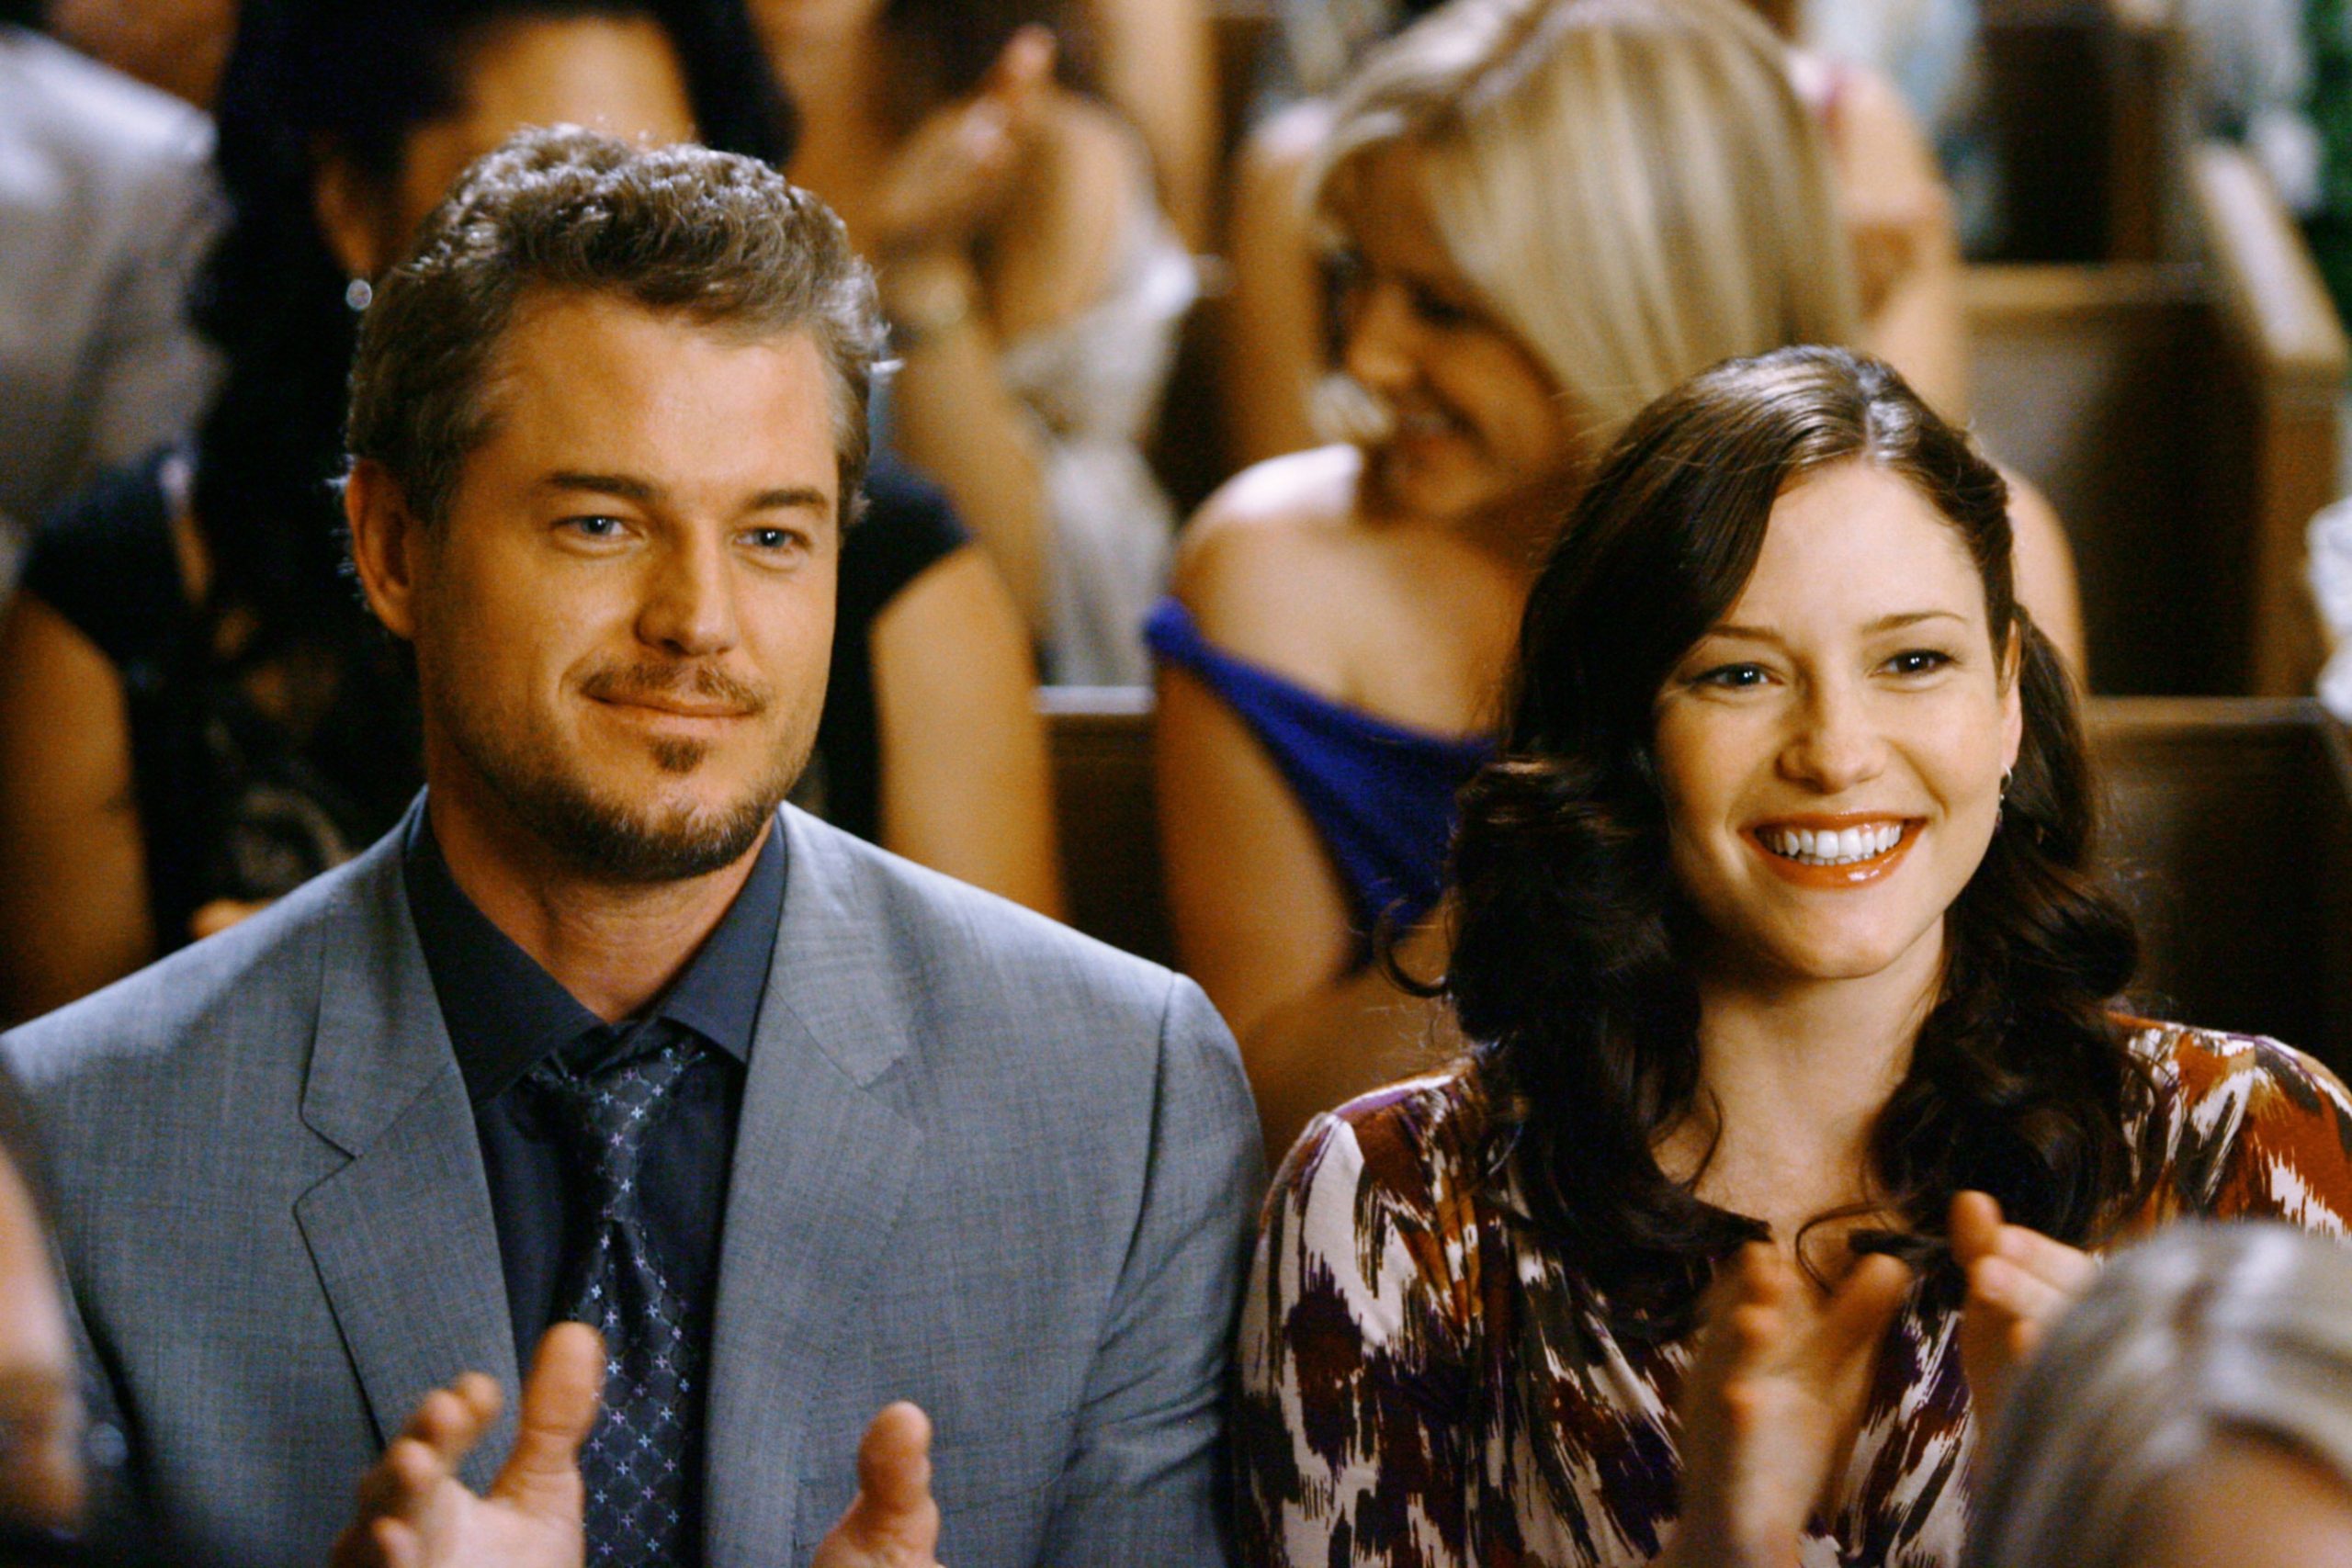 Who Does Lexie Grey End Up With?